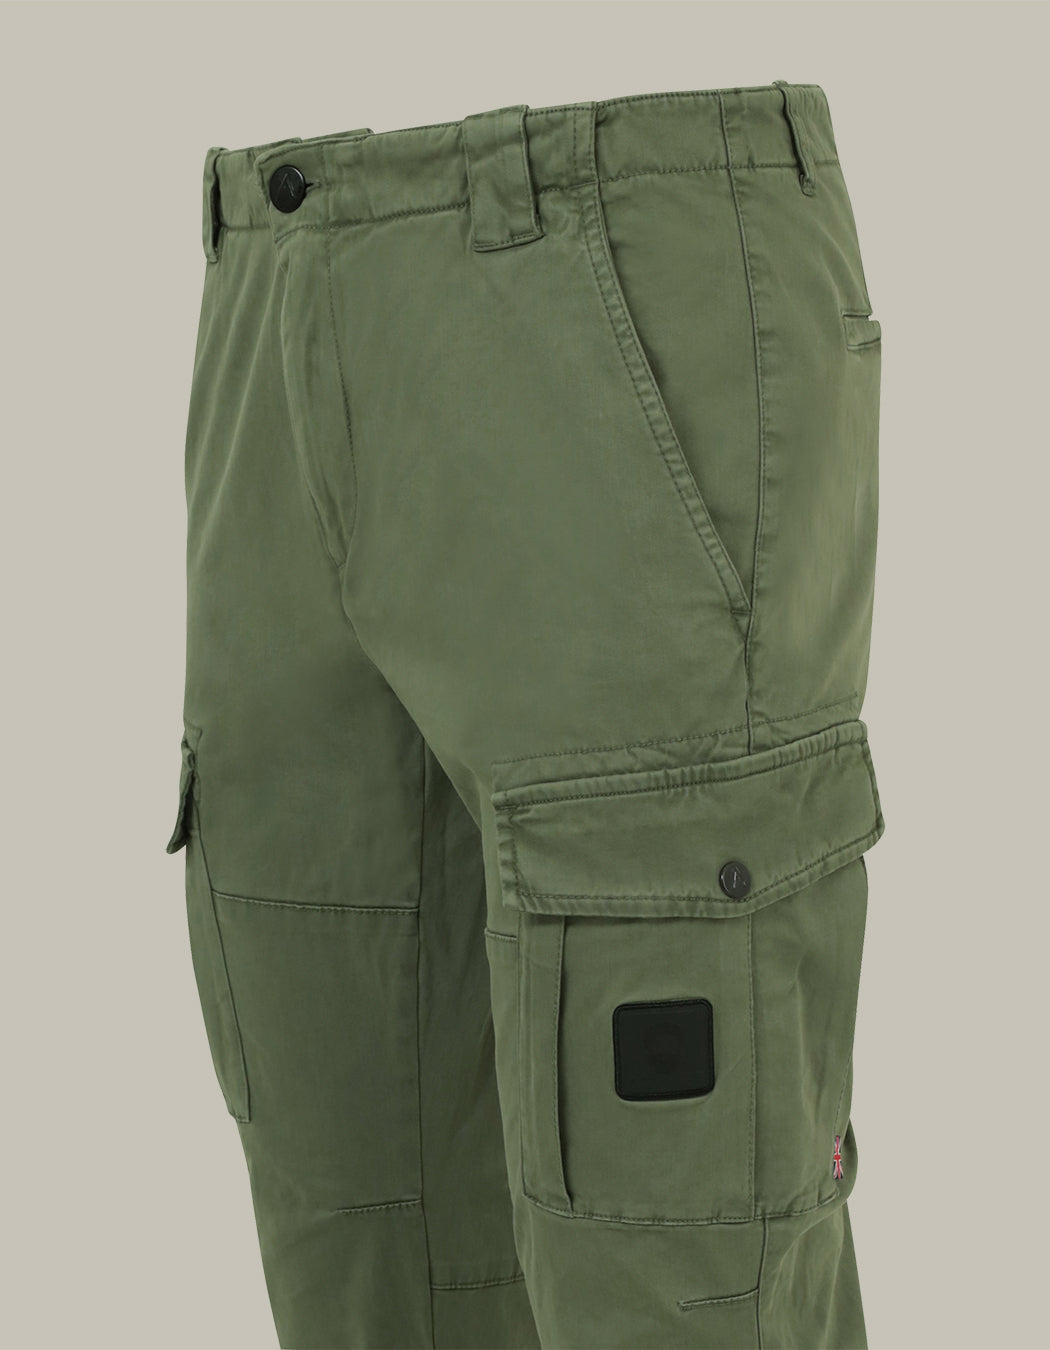 Cargo Trousers (OD Green)